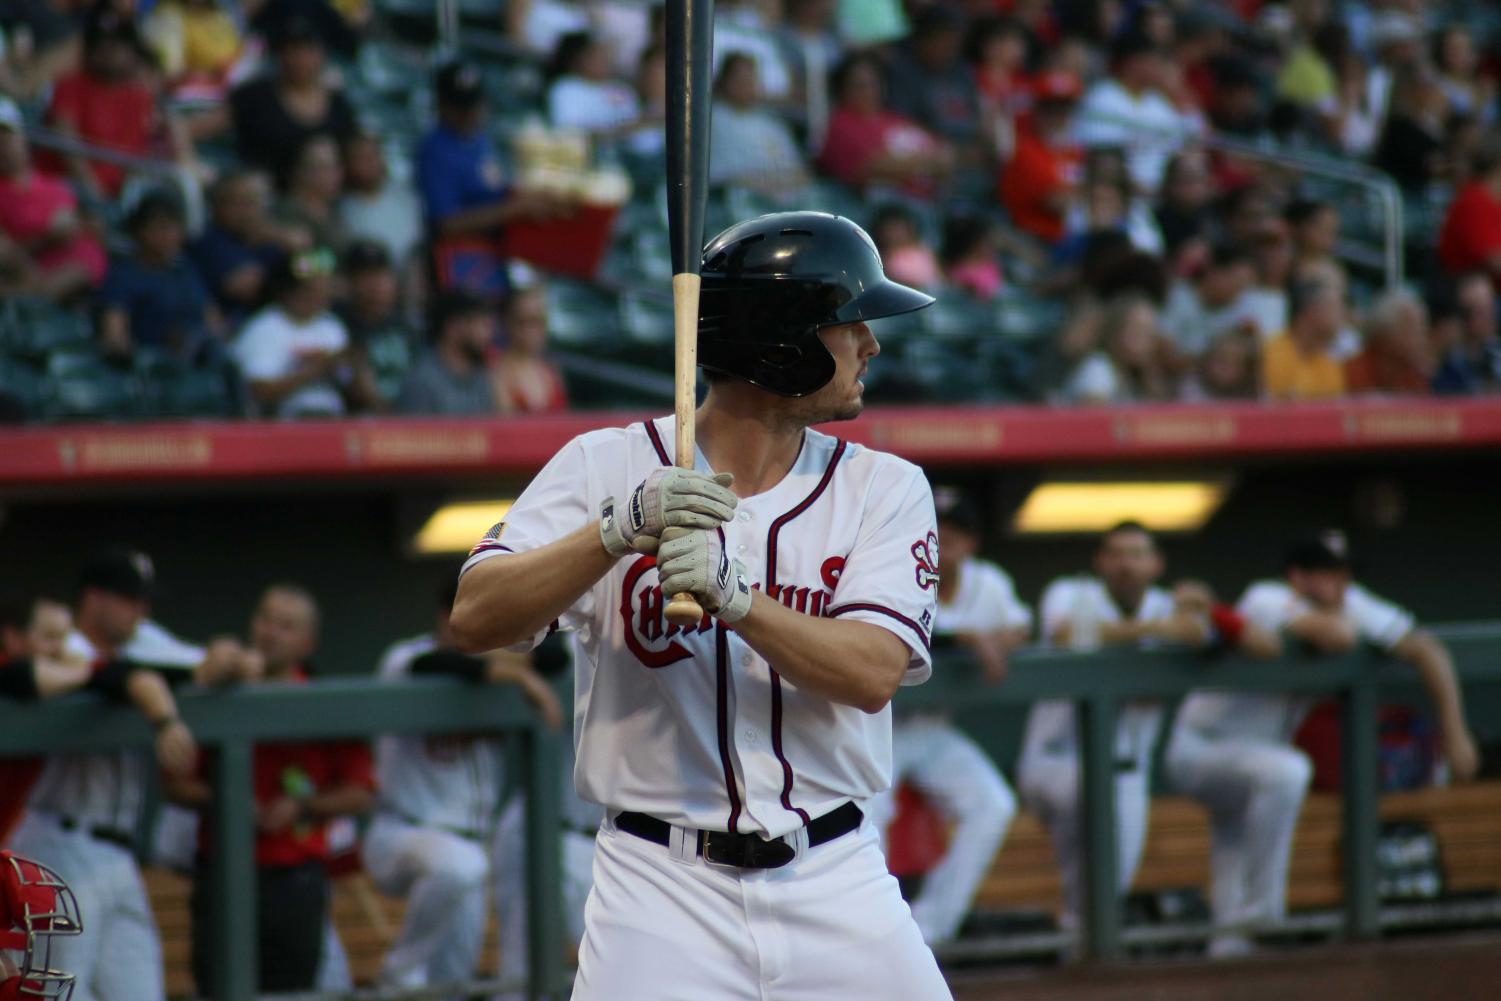 Chihuahuas+earn+series+split+with+Redbirds+after+explosive+win+on+Tuesday